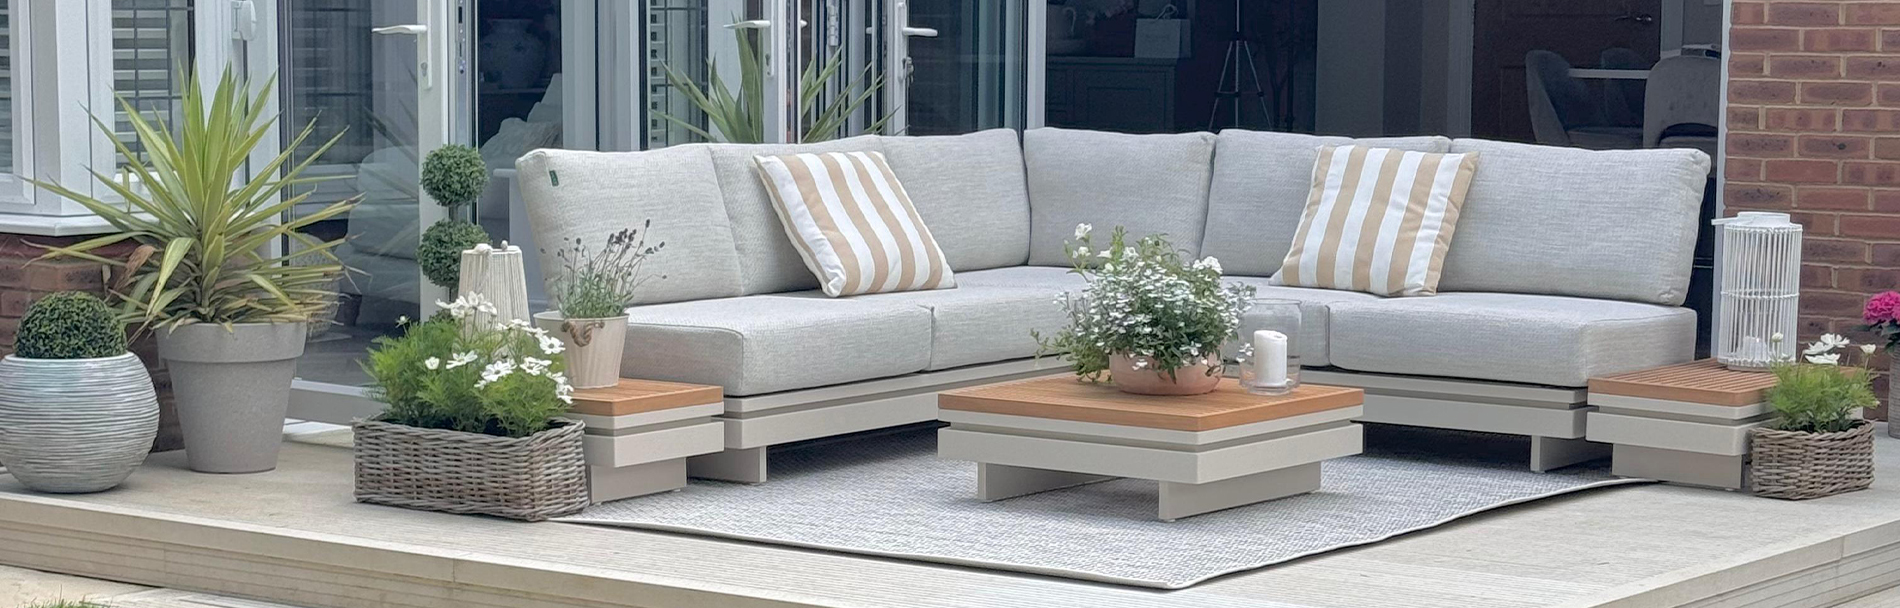 The Bryson garden sofa with cream aluminium and teak accents. Surrounded by plants.